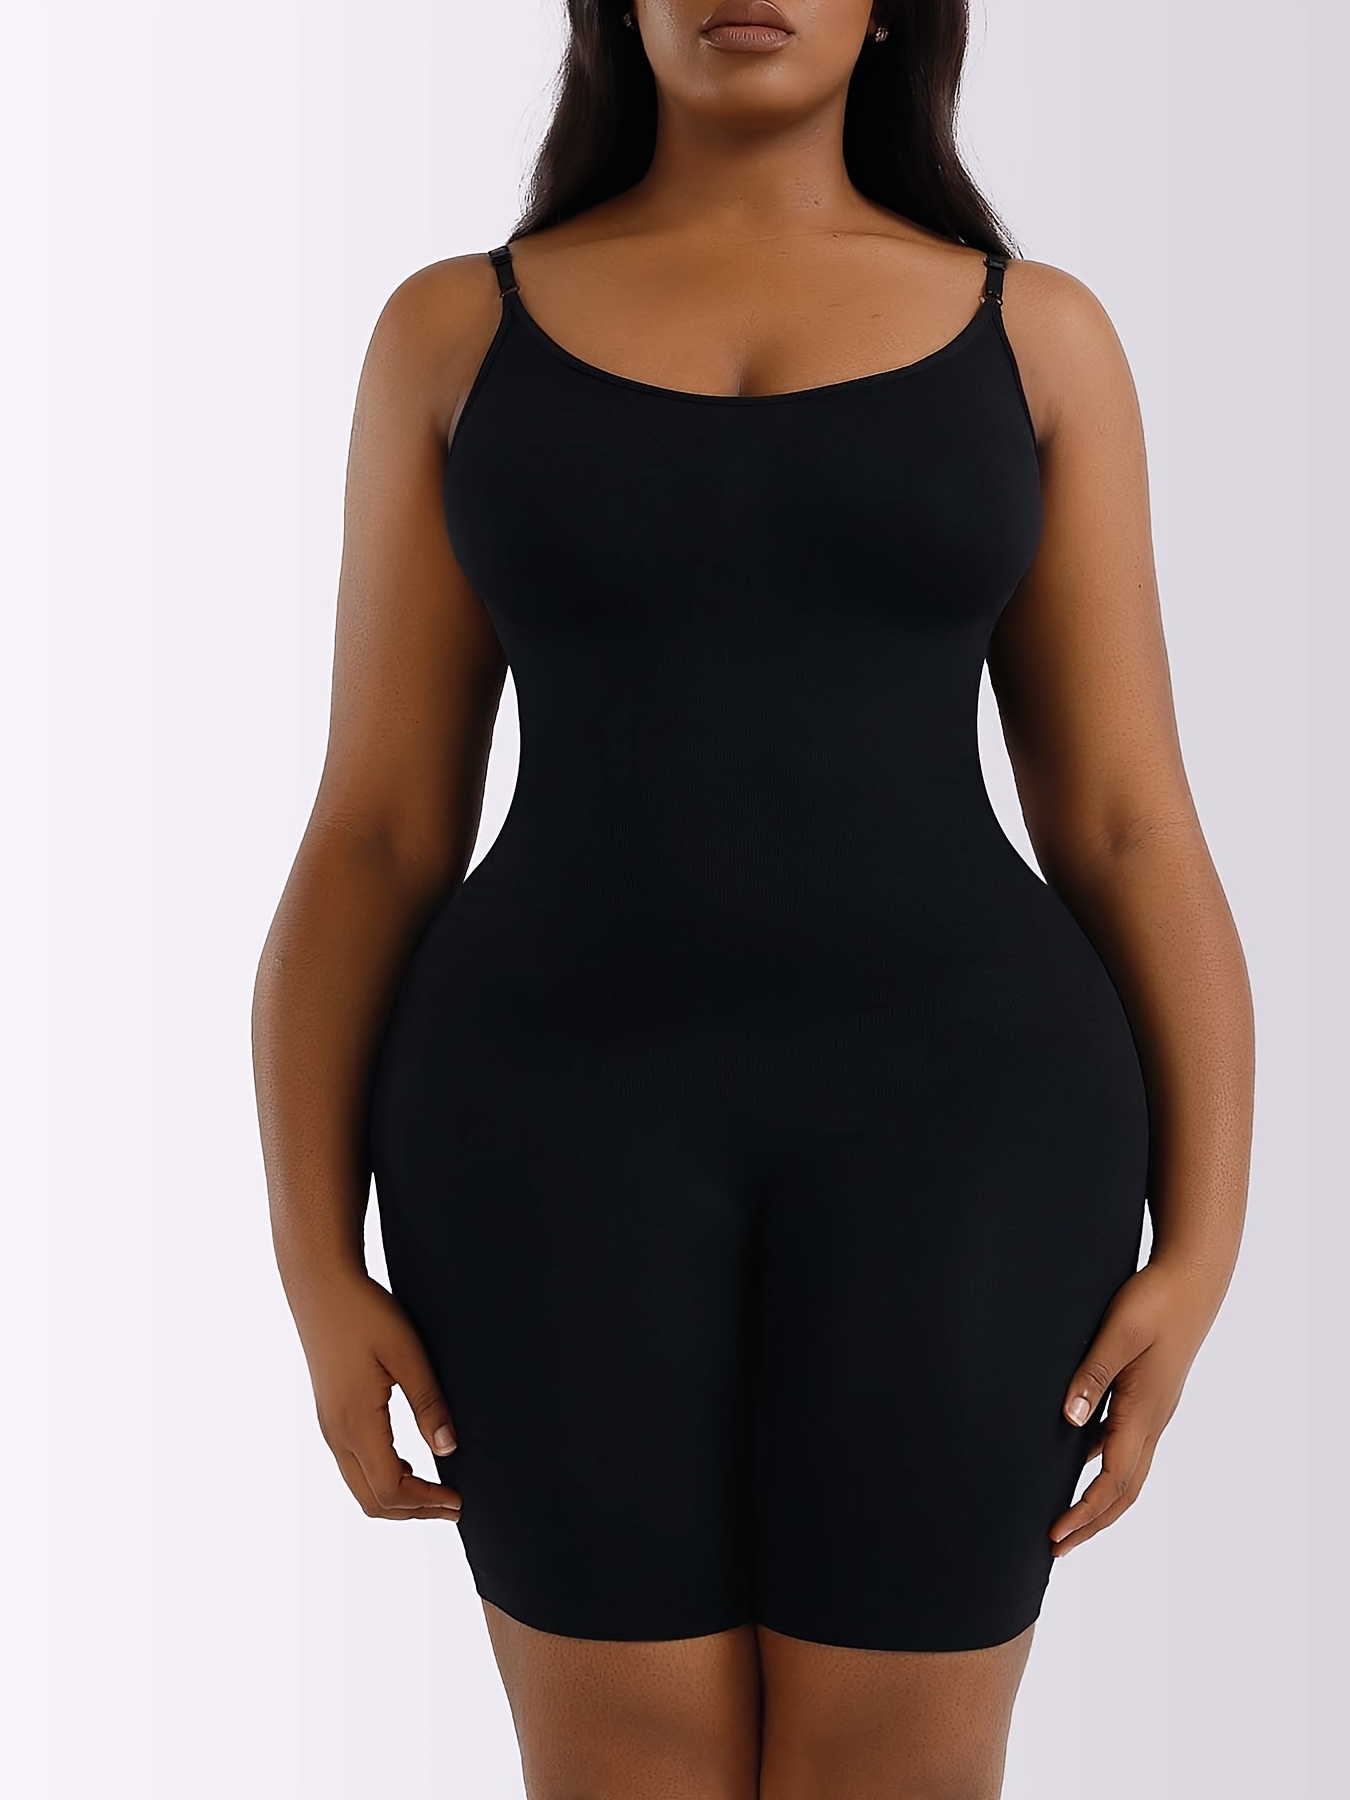 Sexy Sibybo Sculpting Jumpsuit With Waist Plus Size Corset Bodysuit And  Body Shaping Design For Women Summer Outfit T230504 From Mengyang02, $8.84